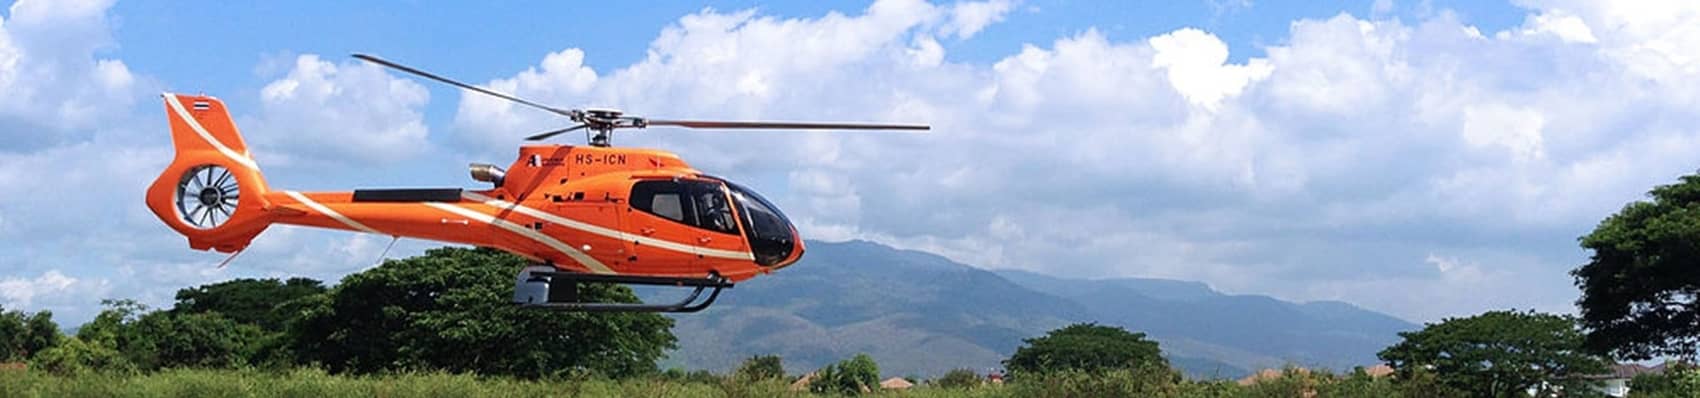 chiang mai helicopter tour